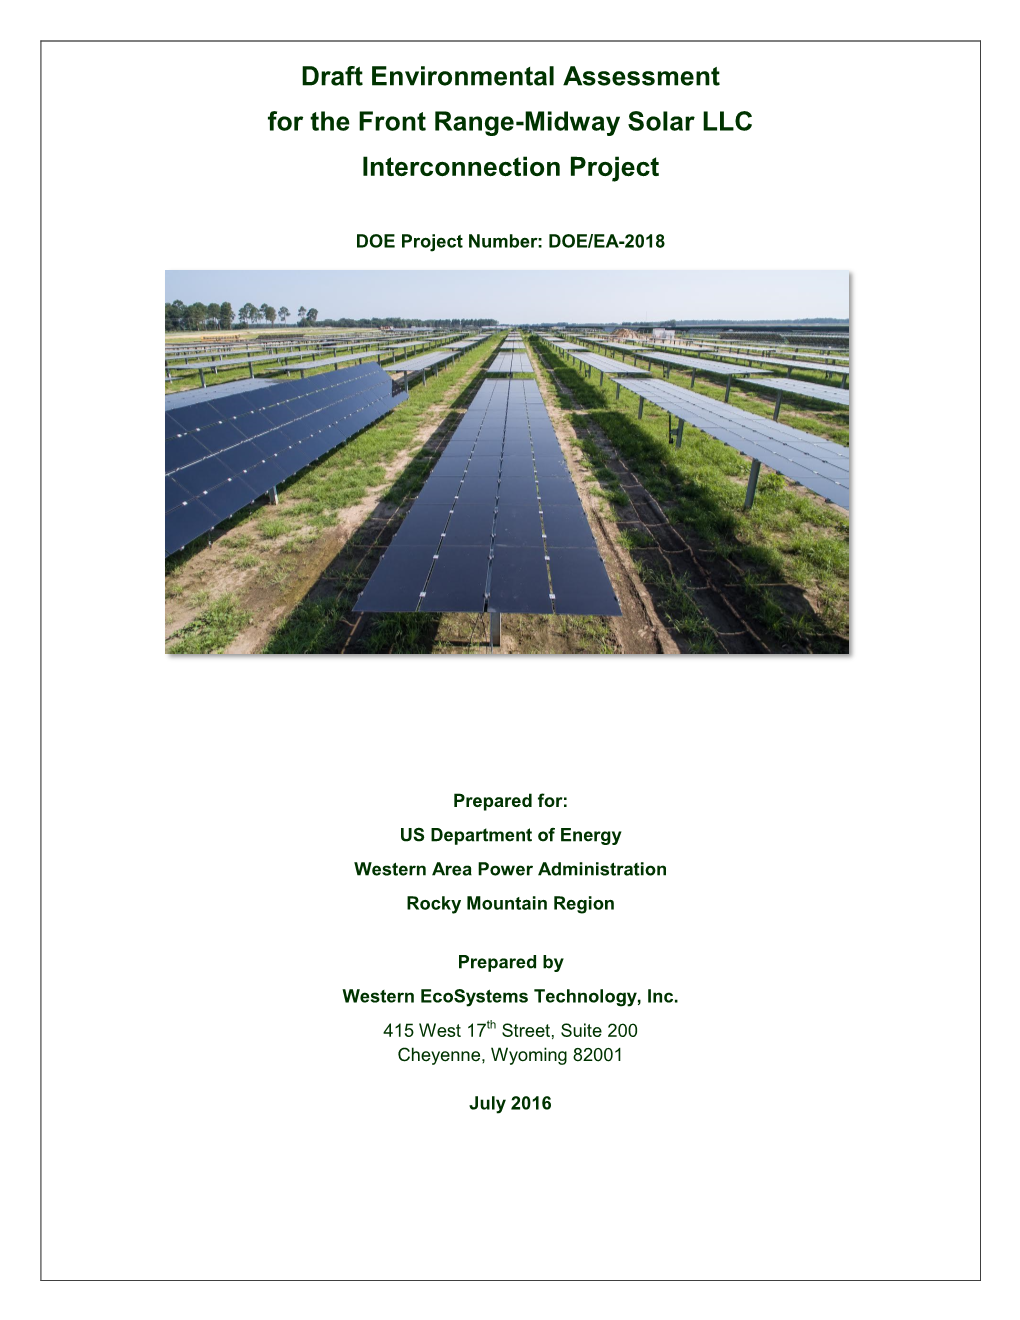 Draft Environmental Assessment for the Front Range-Midway Solar LLC Interconnection Project